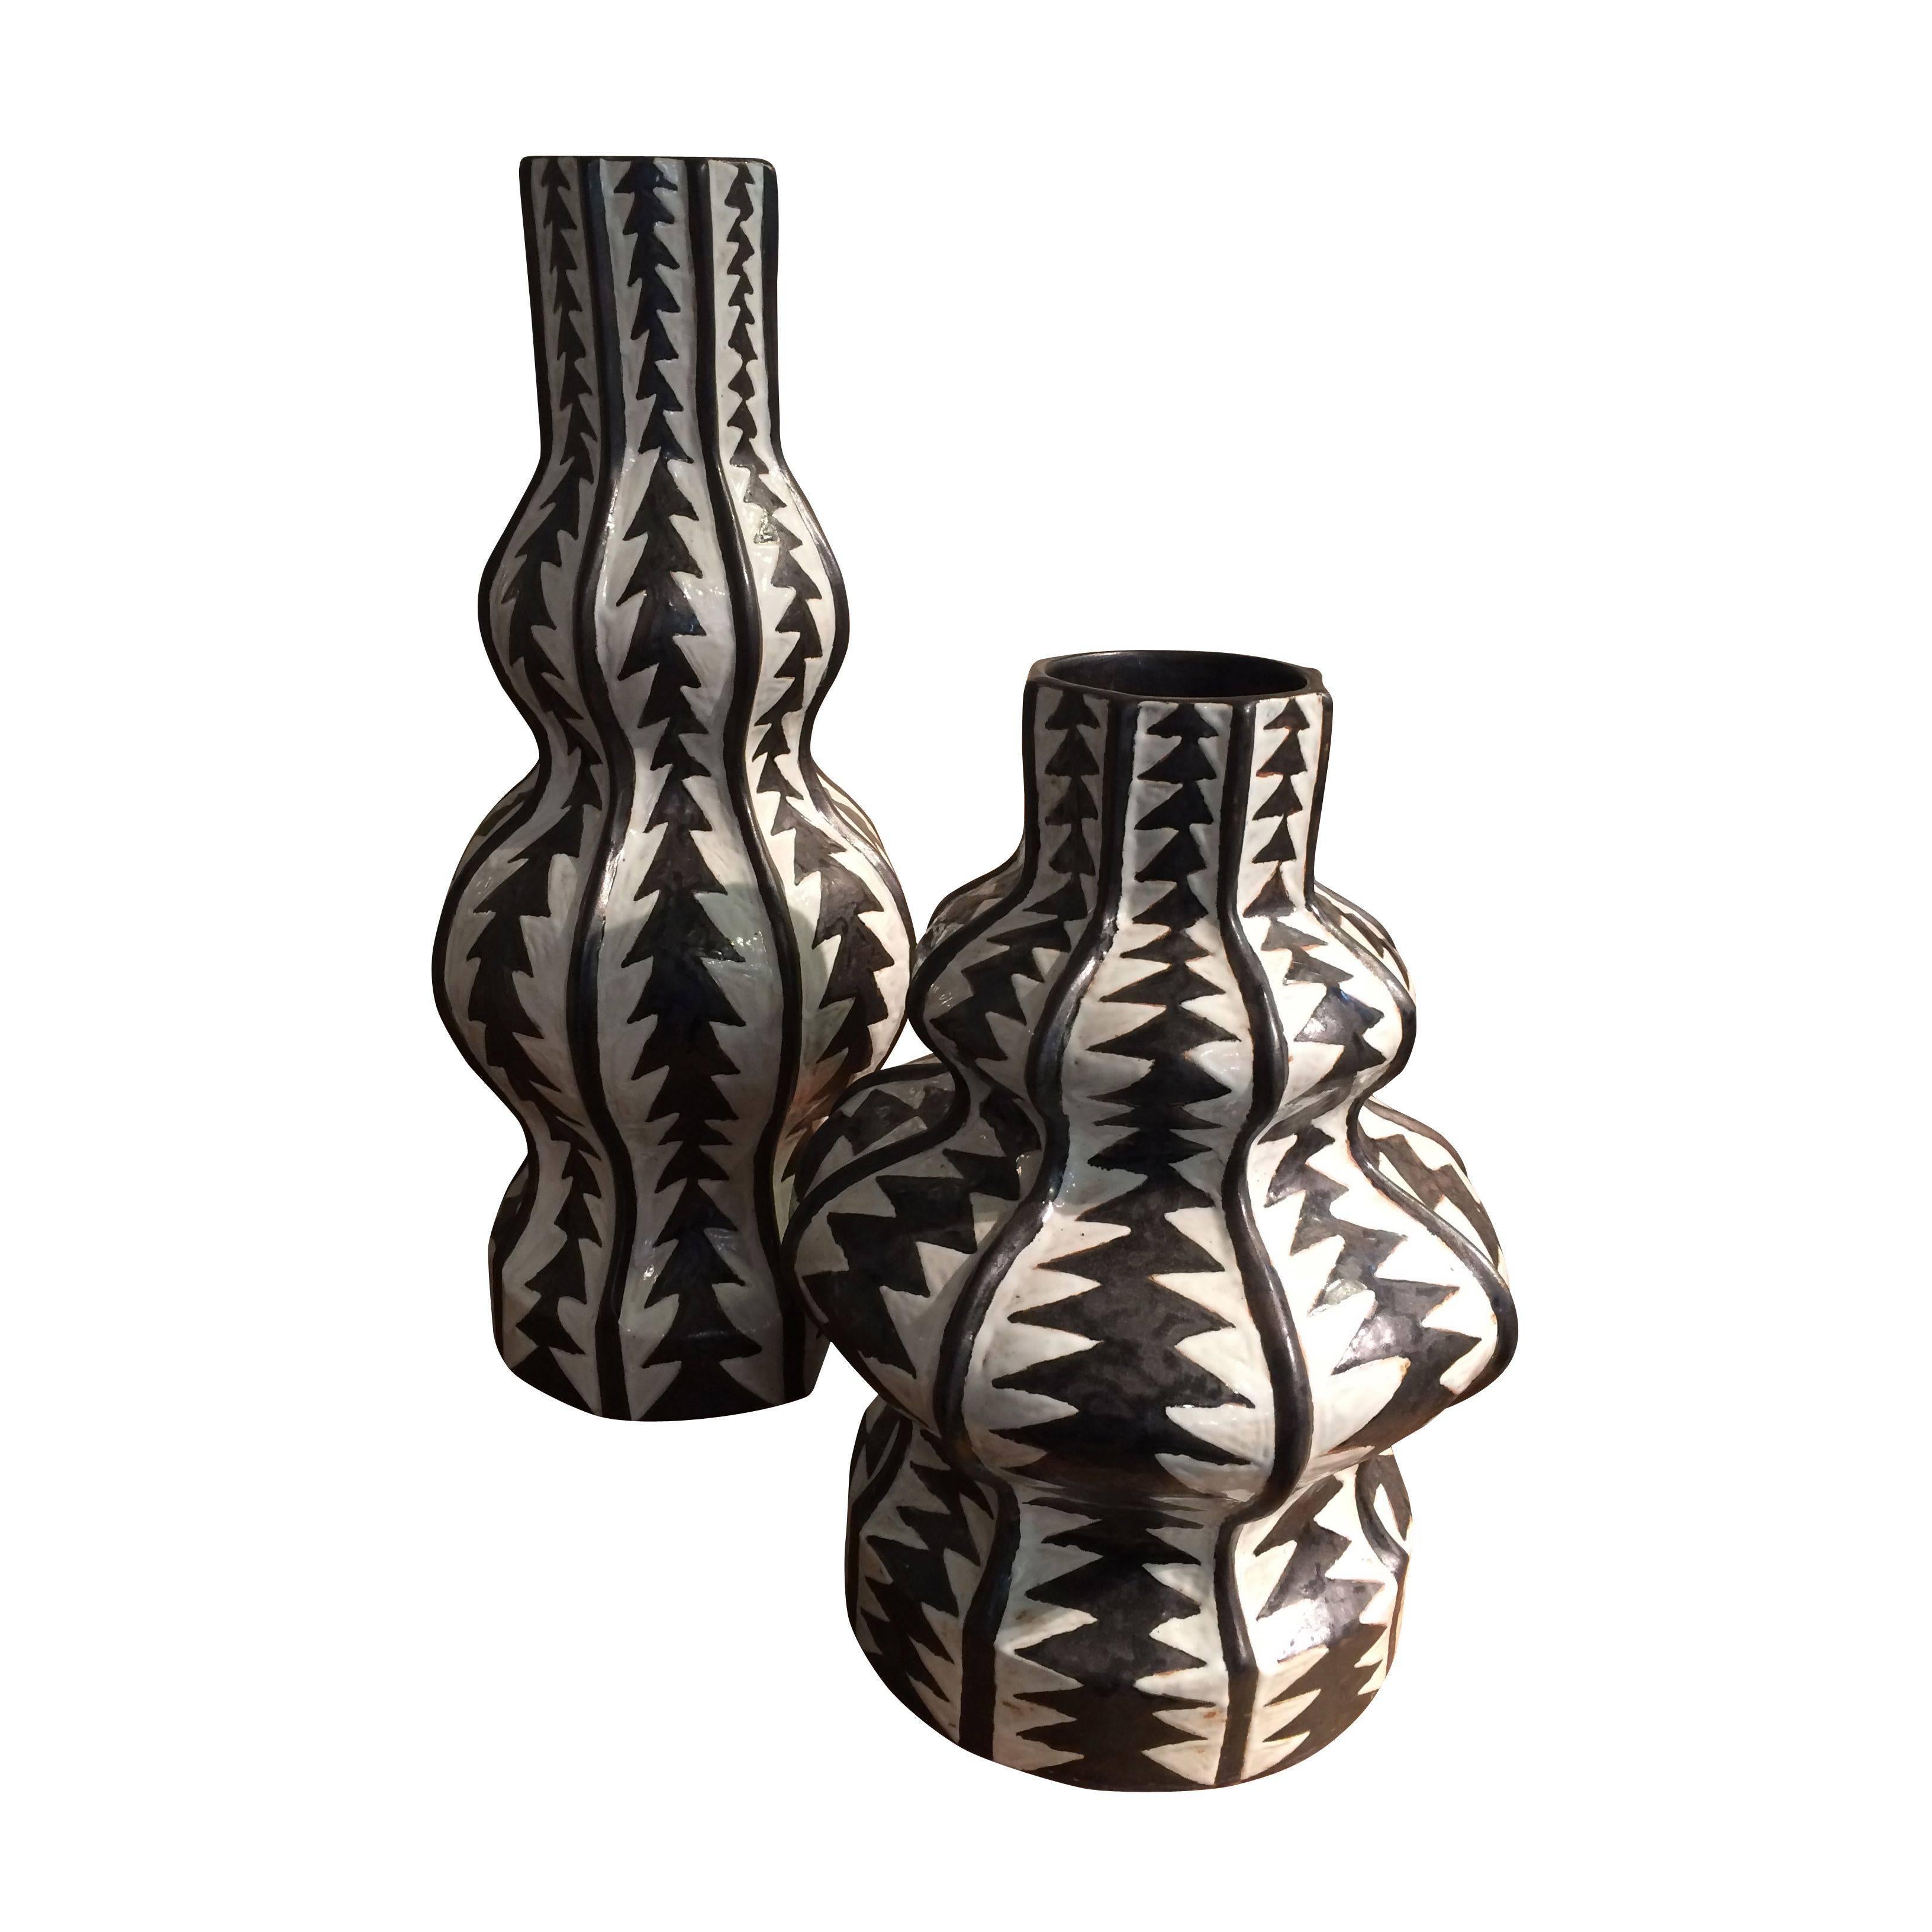 Contemporary Thai gourd shaped stoneware vase with black ethnic stripes.
Works well paired with S4627.
See image #2.